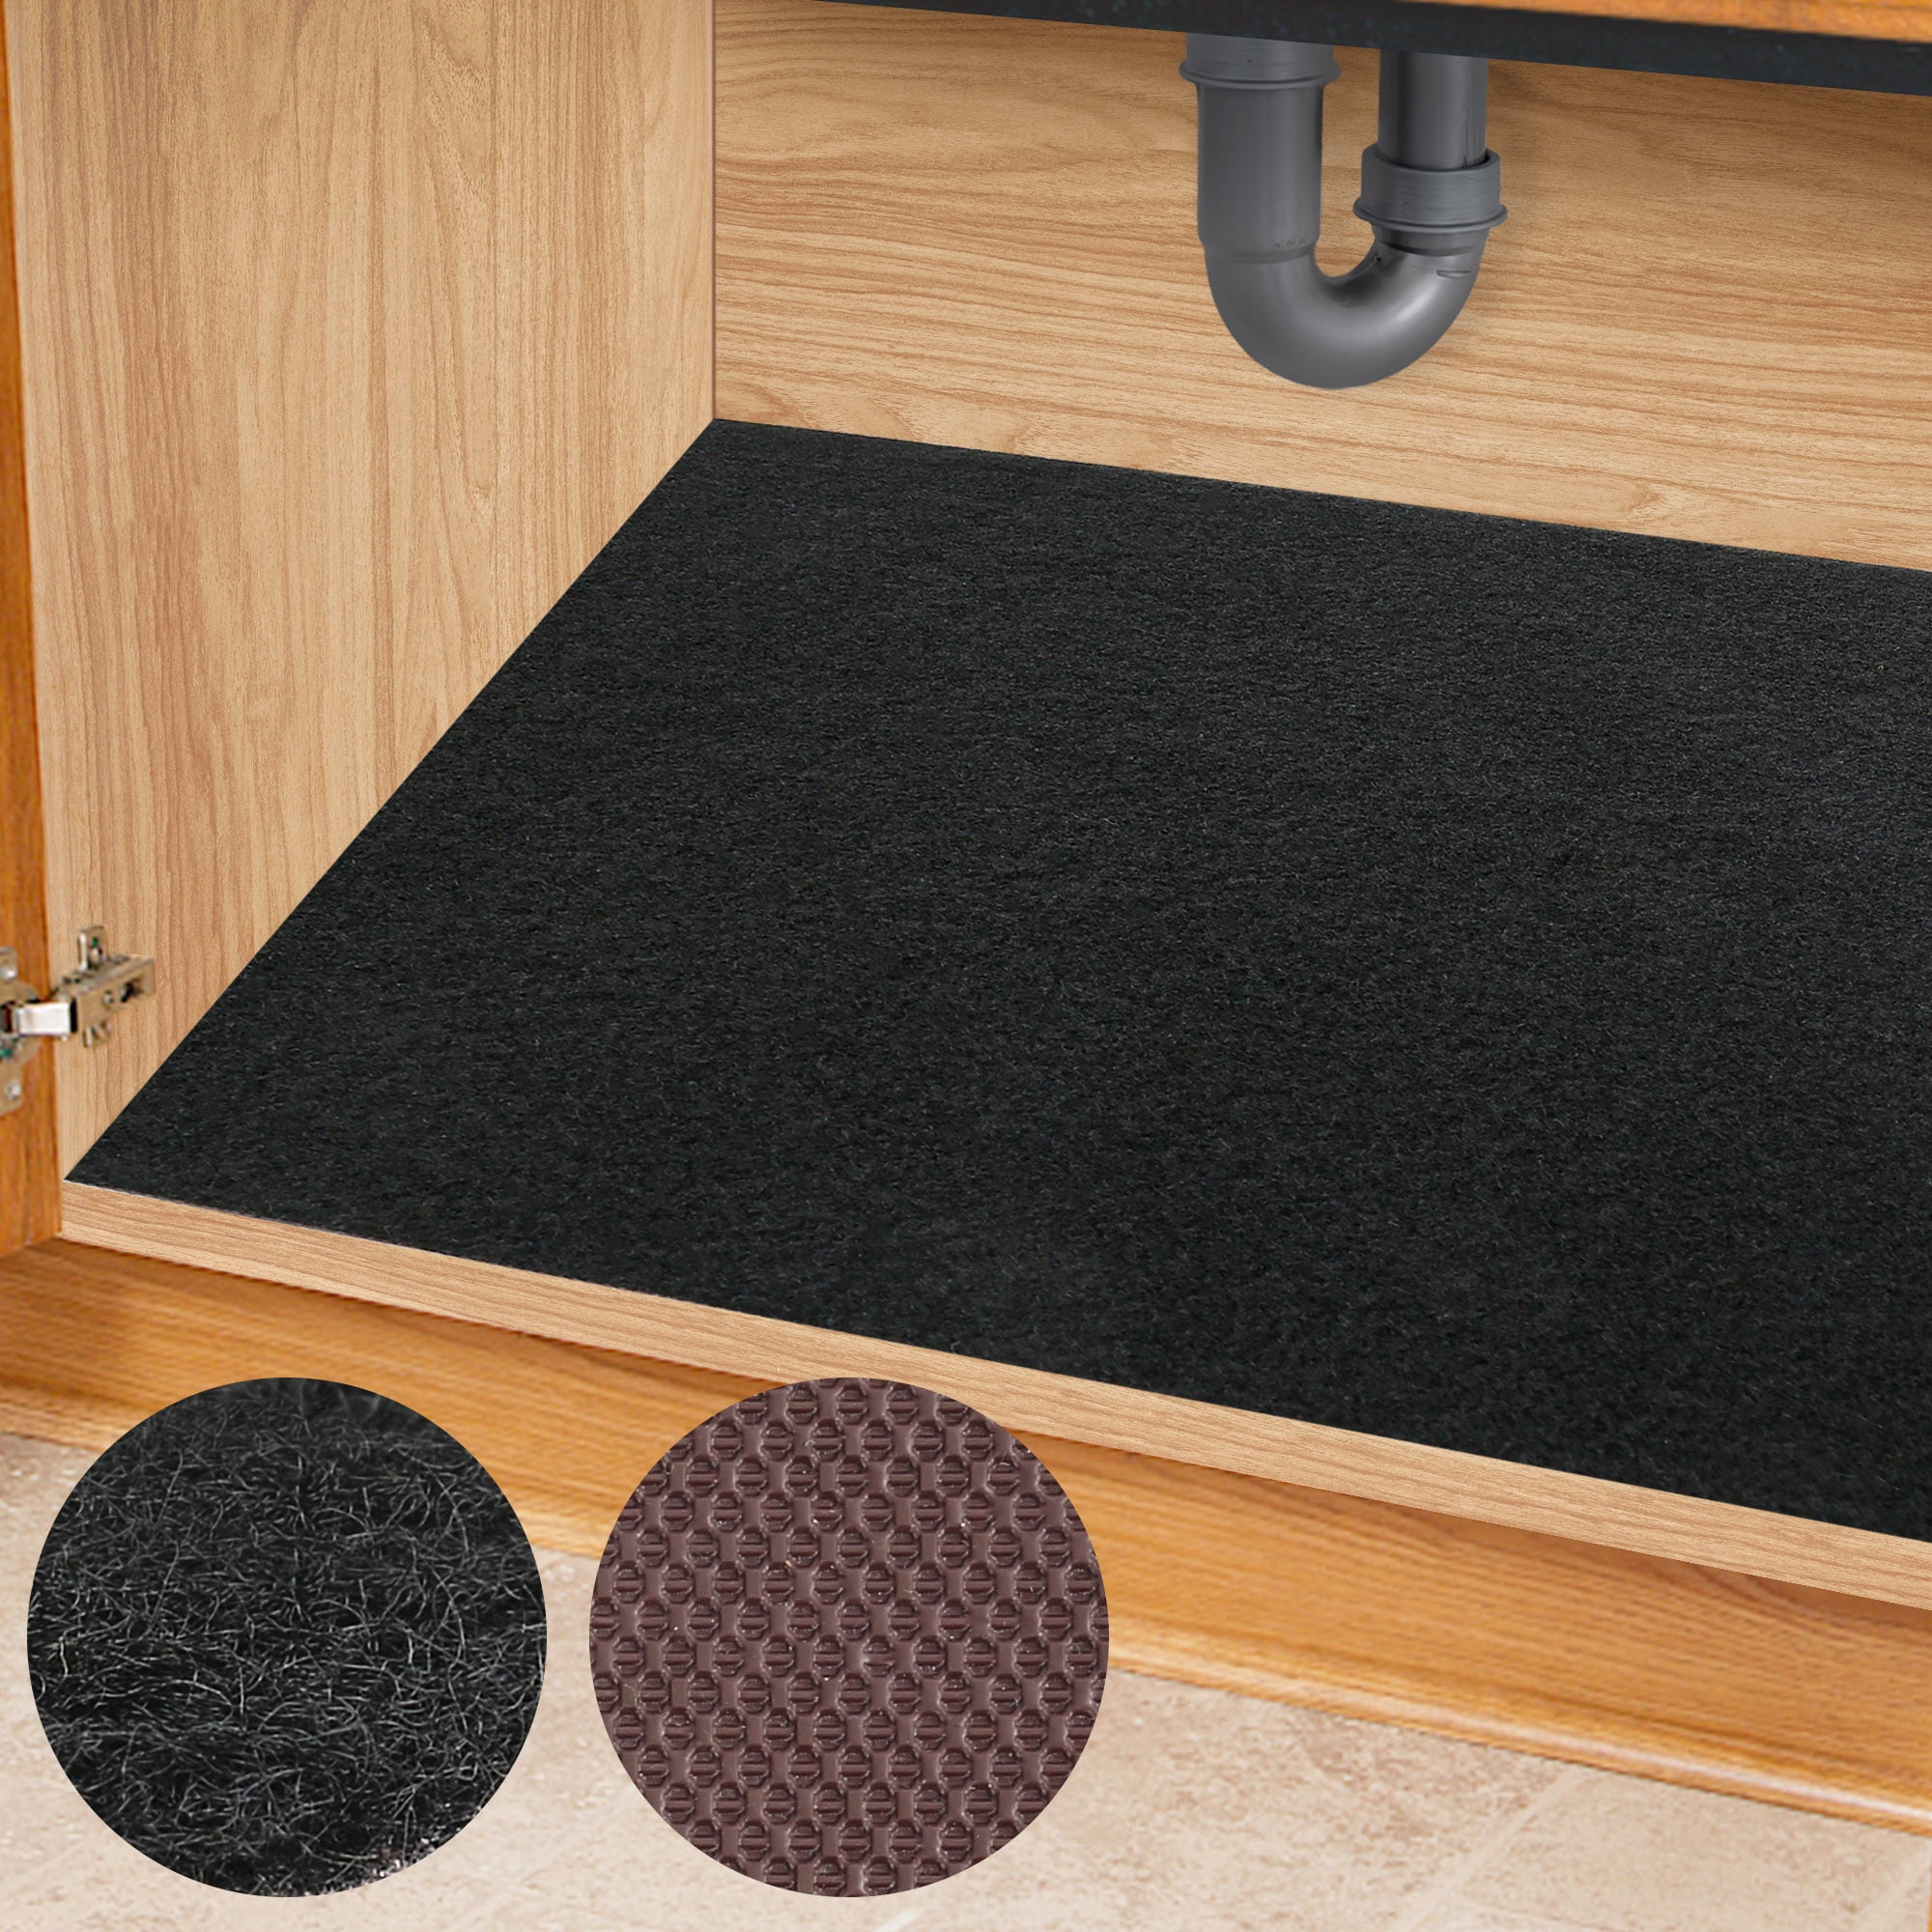 Under The Sink Mat,Cabinet Mat – Absorbent/Waterproof – Protects Cabinets,  Premium Shelf Liner, Contains Liquids,Washable(24in x 36in) (24×36)